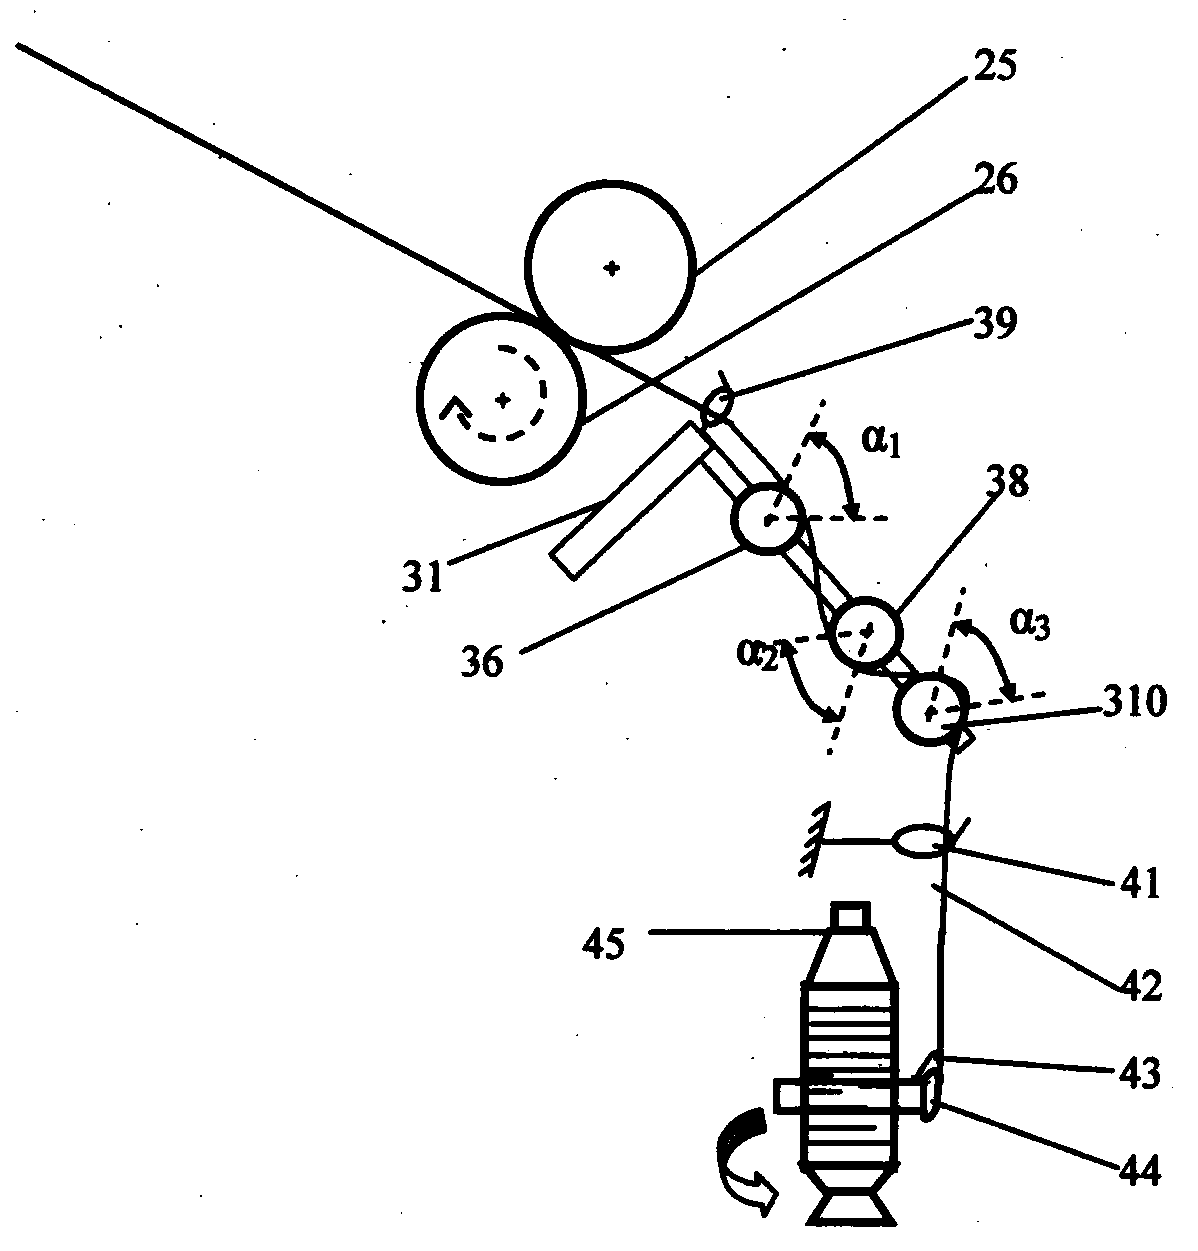 Three-point mutual wrapping and winding type spun yarn evening and ordering device and method